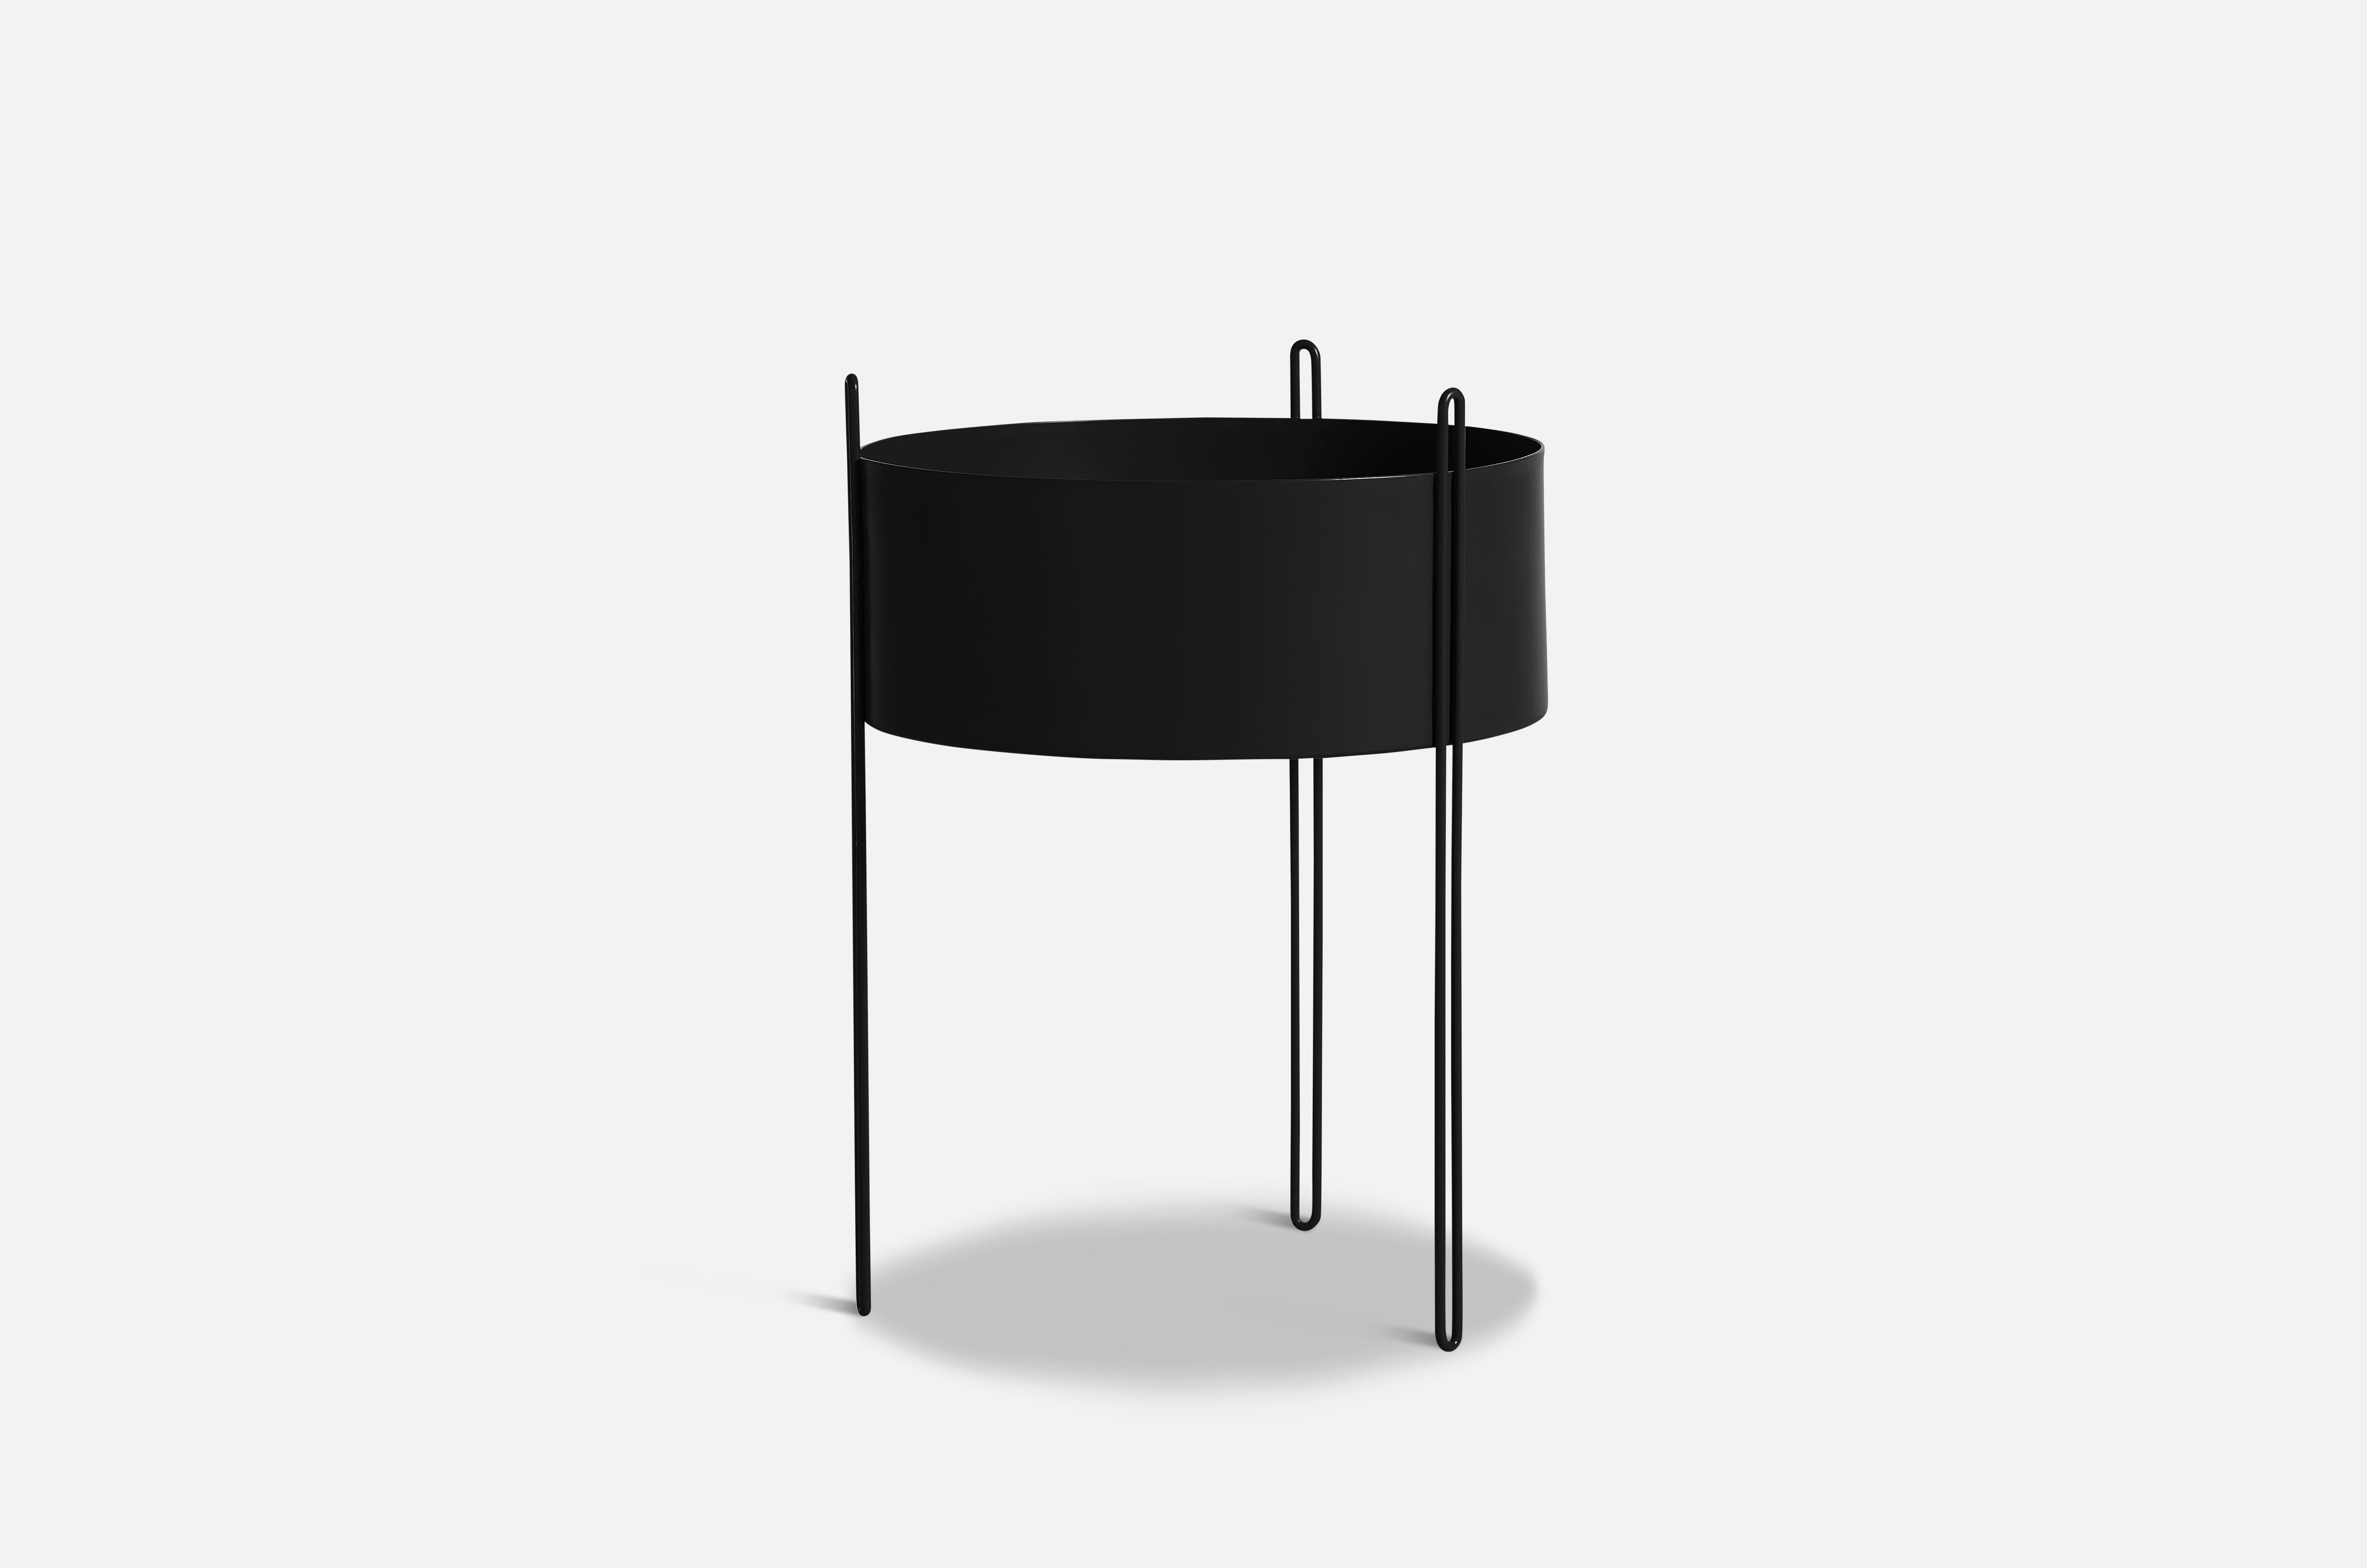 Large black pidestall planter by Emilie Stahl Carlsen
Materials: Metal.
Dimensions: D 40 x H 55 cm
Available in grey, red, taupe or black and in 3 sizes: D 15 x H 15, D 40 x H 35, D 40 x H 55 cm.

Emilie Stahl Carlsen is a Nor wegian designer